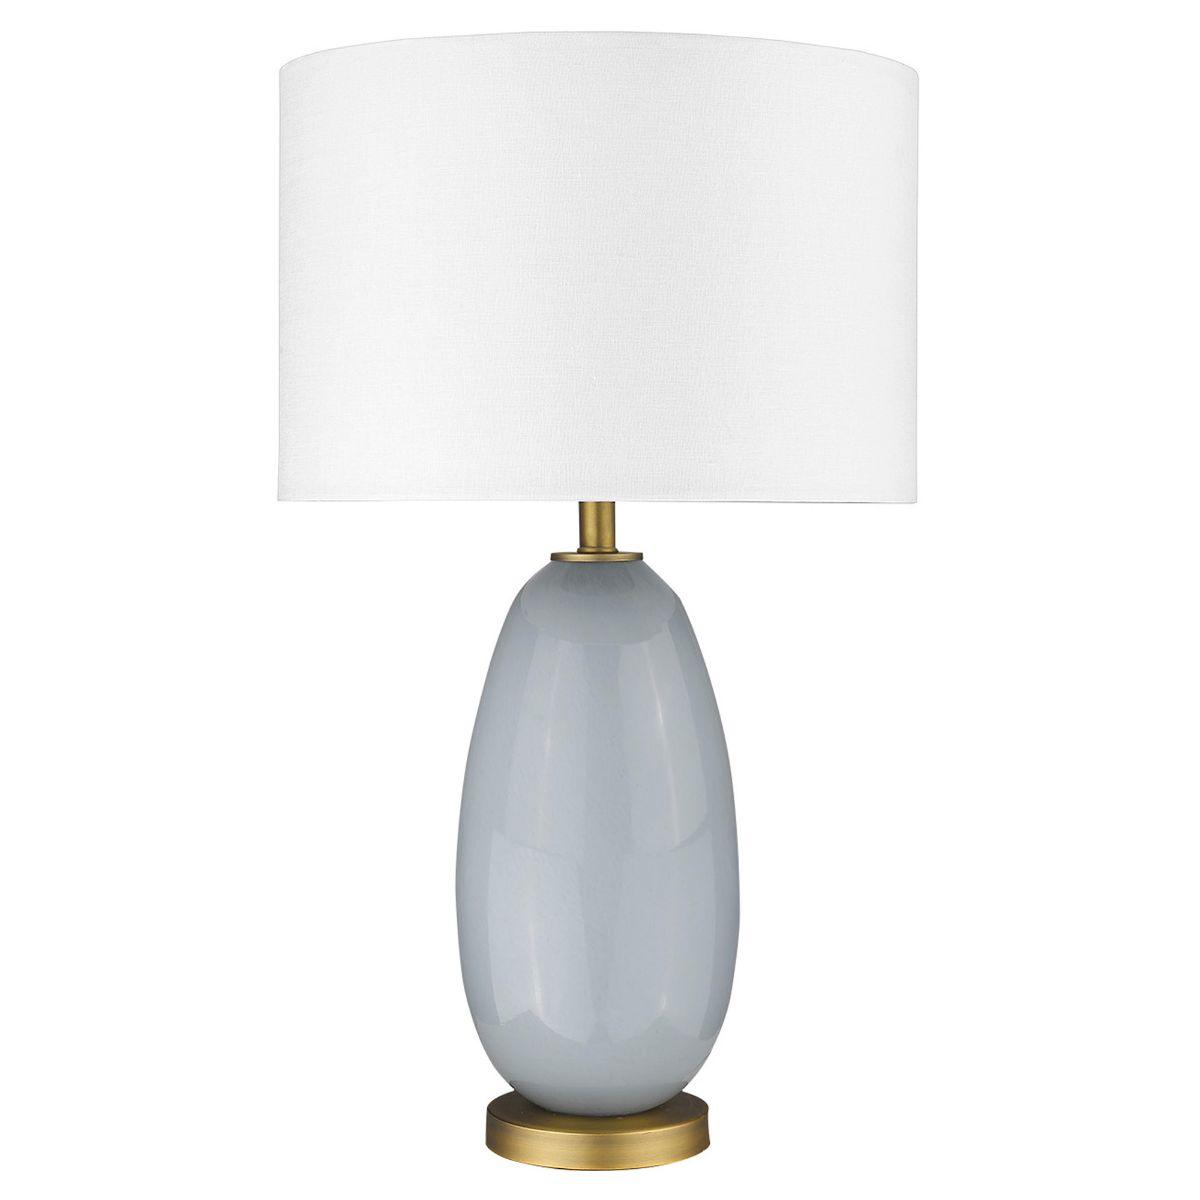 Trend Home 1 Light Table Lamp Misty White Glass Body and Brass Accents